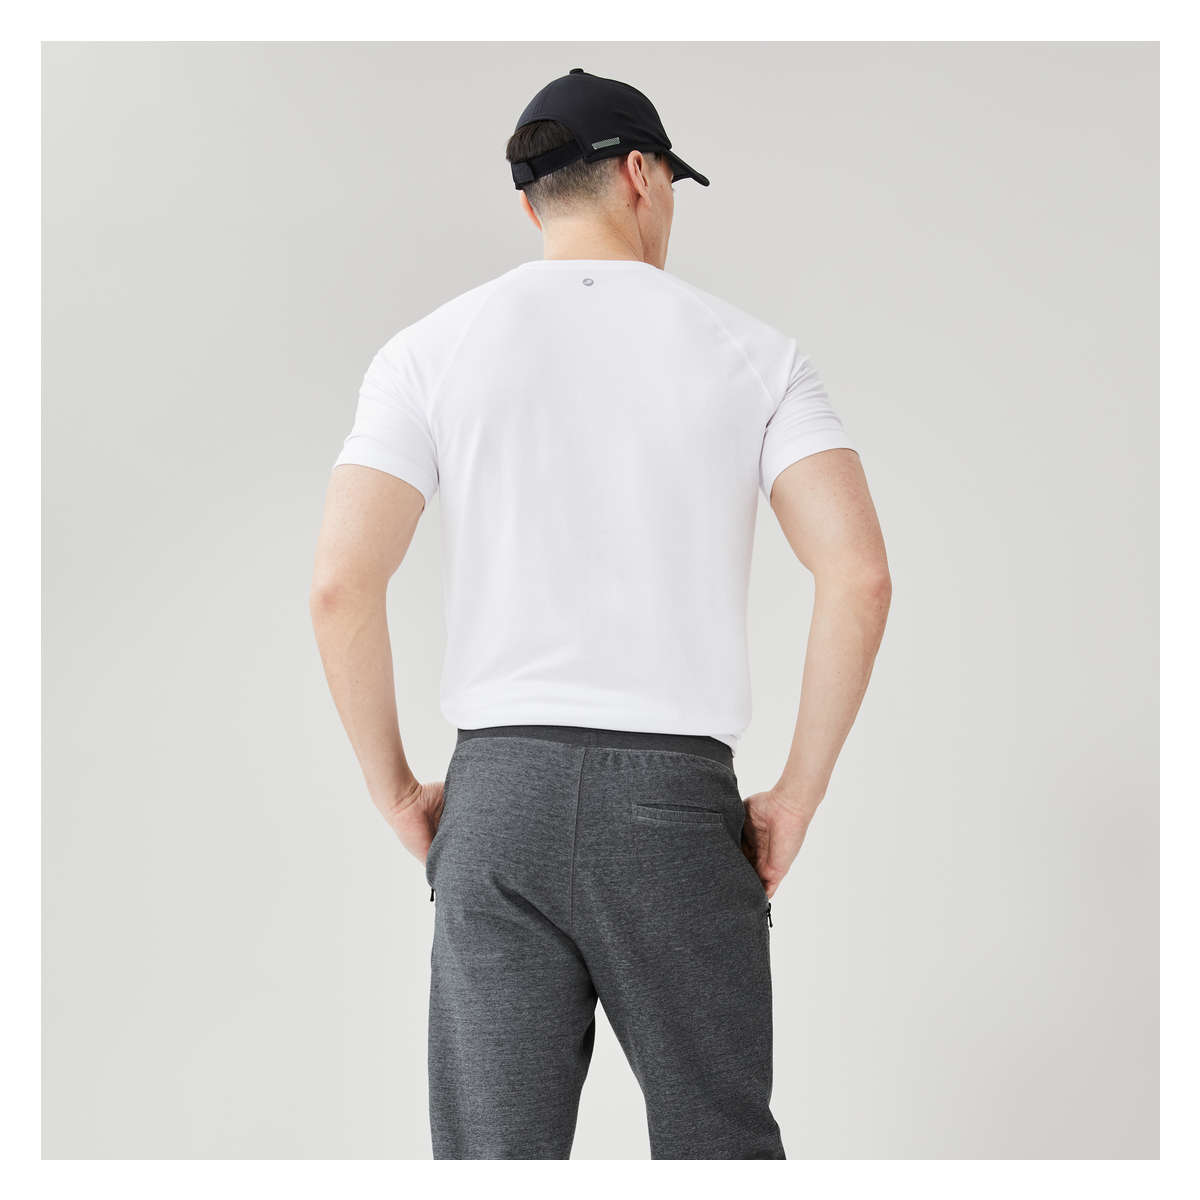 Adult Joggers with Side Zipper Pockets - Style 707